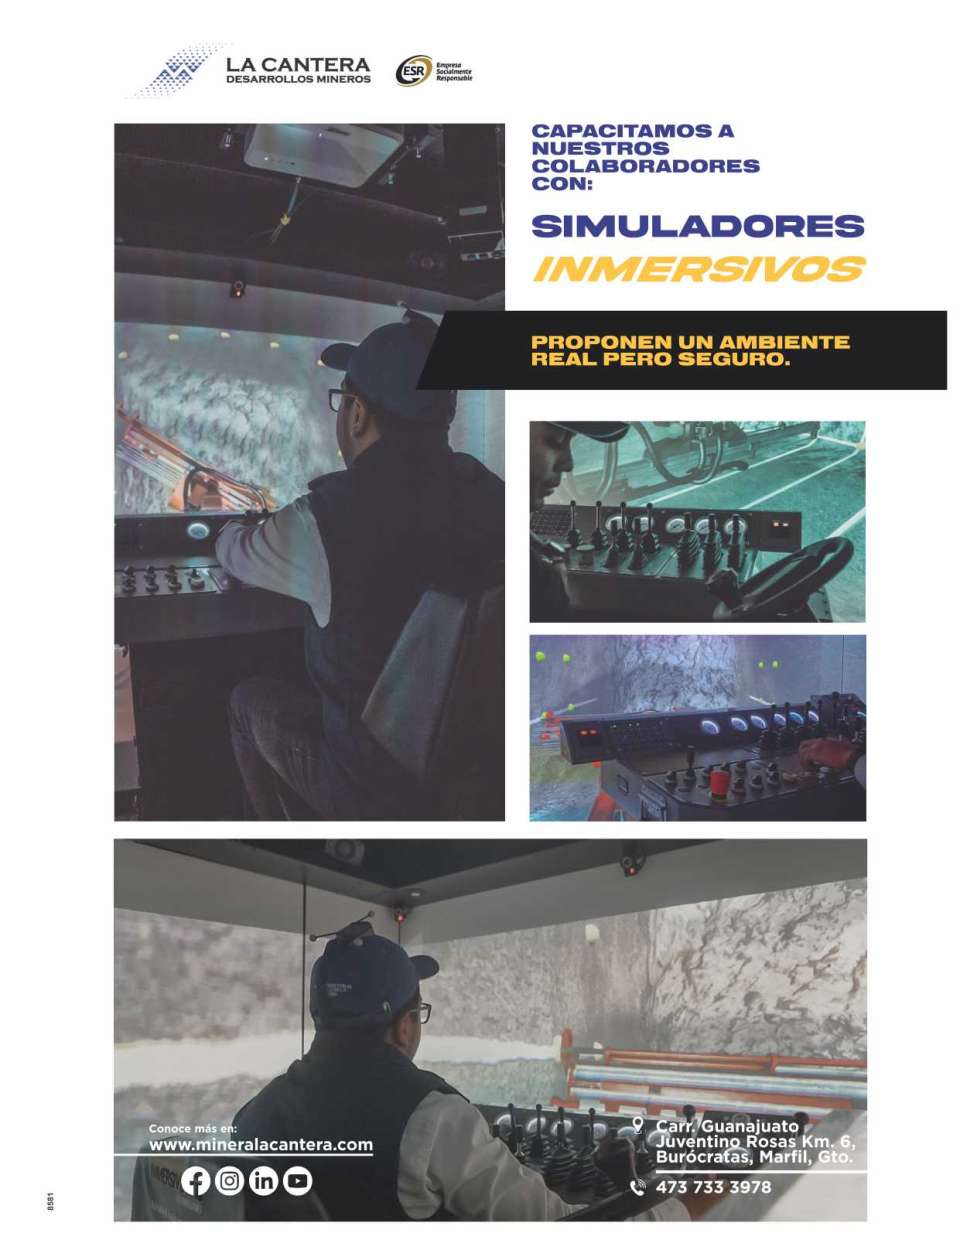 We train our Collaborators with: Immersive Simulators, which Provide a Real, but Safe Environment.